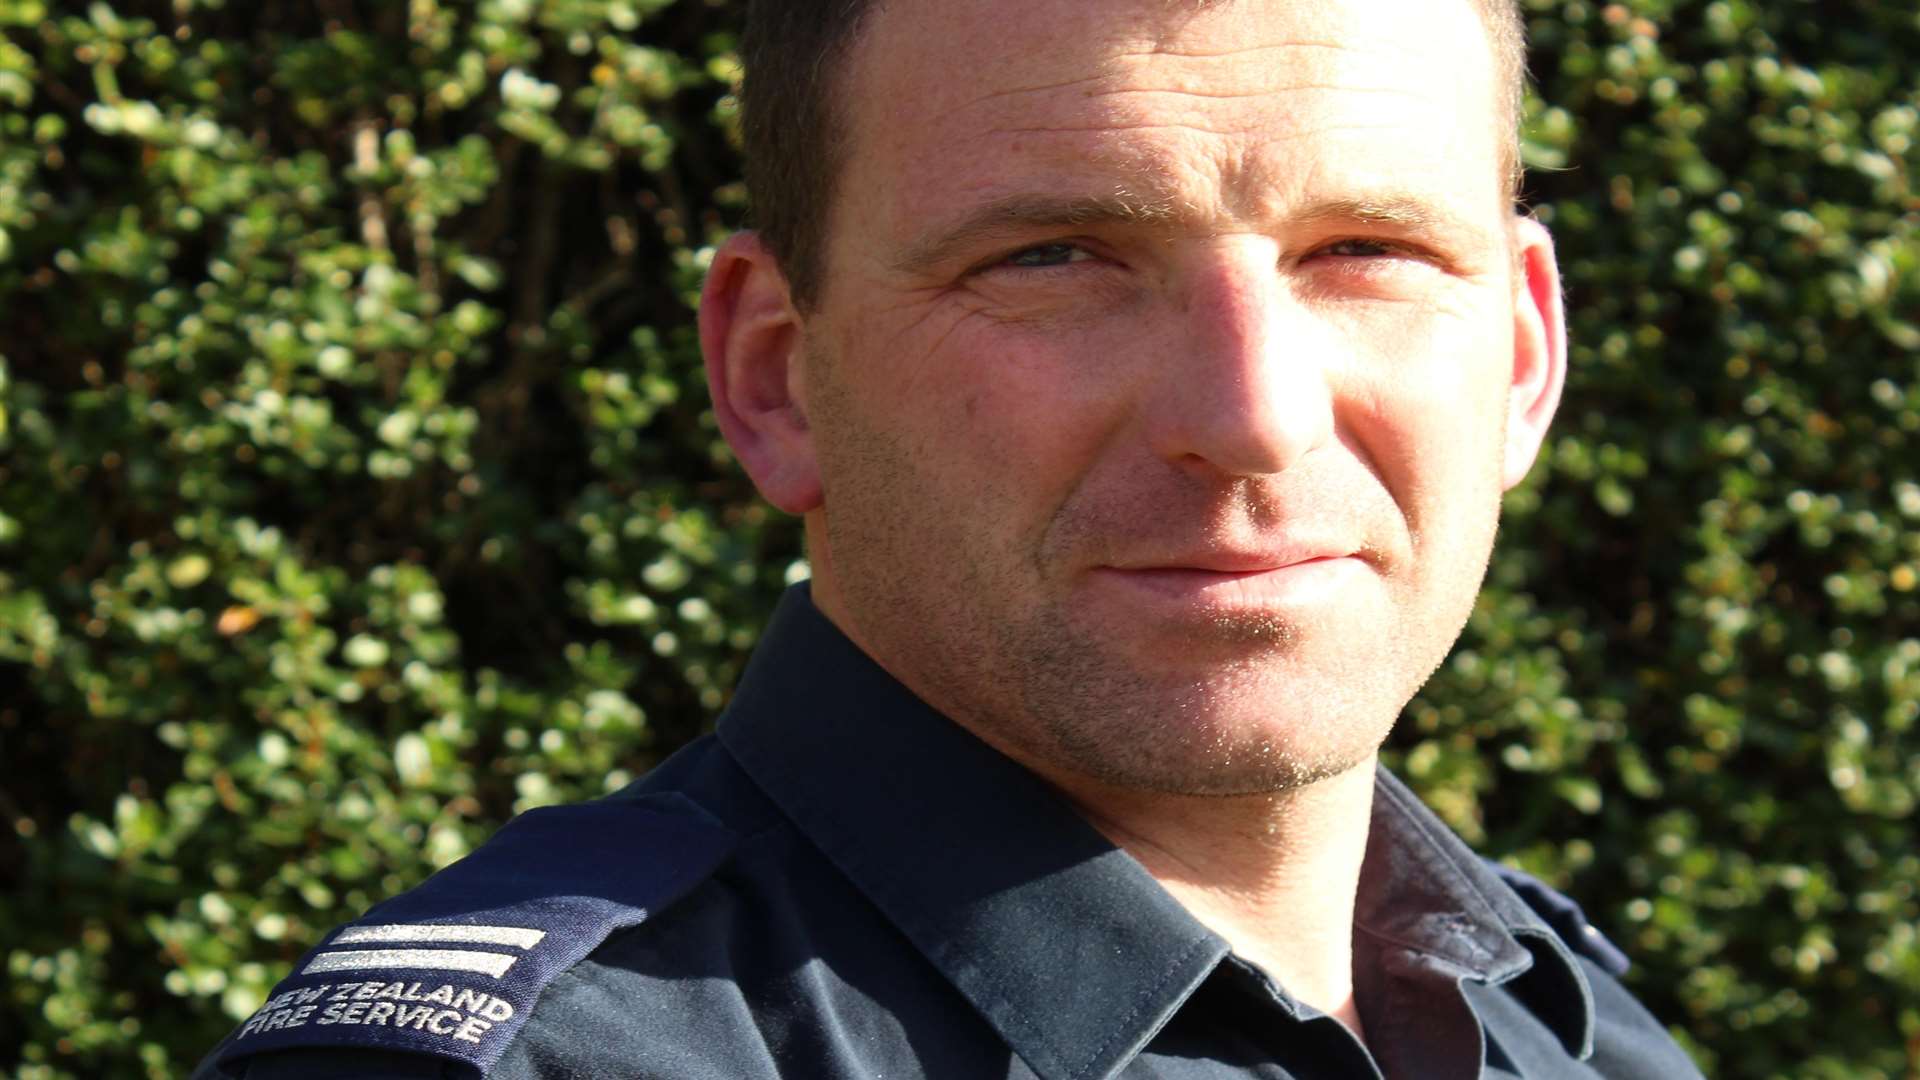 Firefighter Mark Whittaker, originally from Herne Bay, has been put forward for the New Zealand Bravery Medal